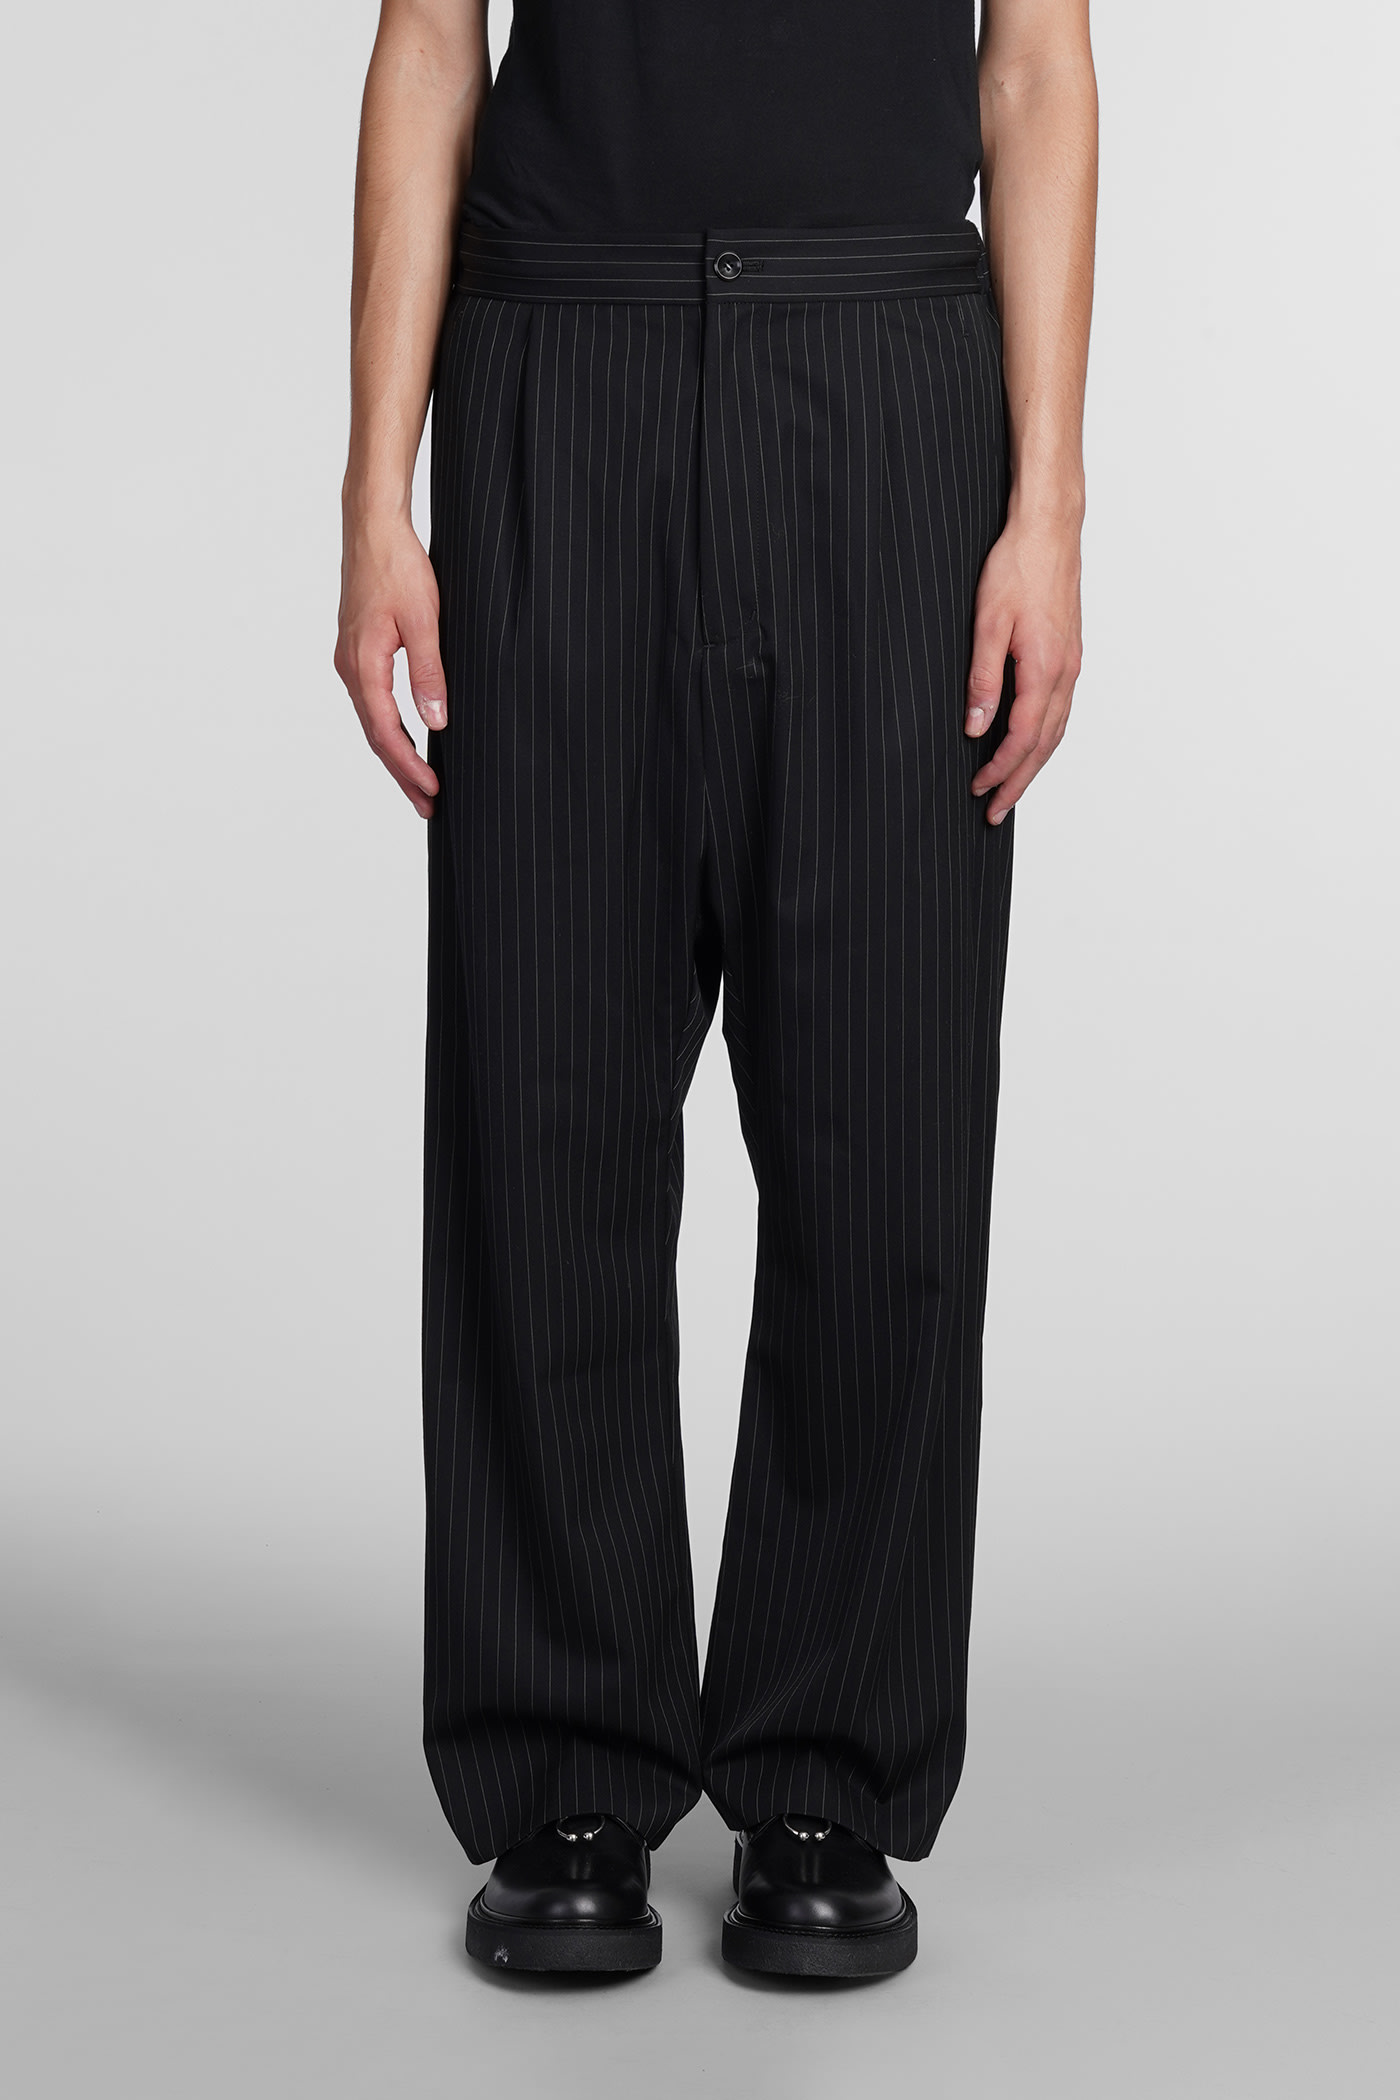 ATTACHMENT PANTS IN BLACK WOOL